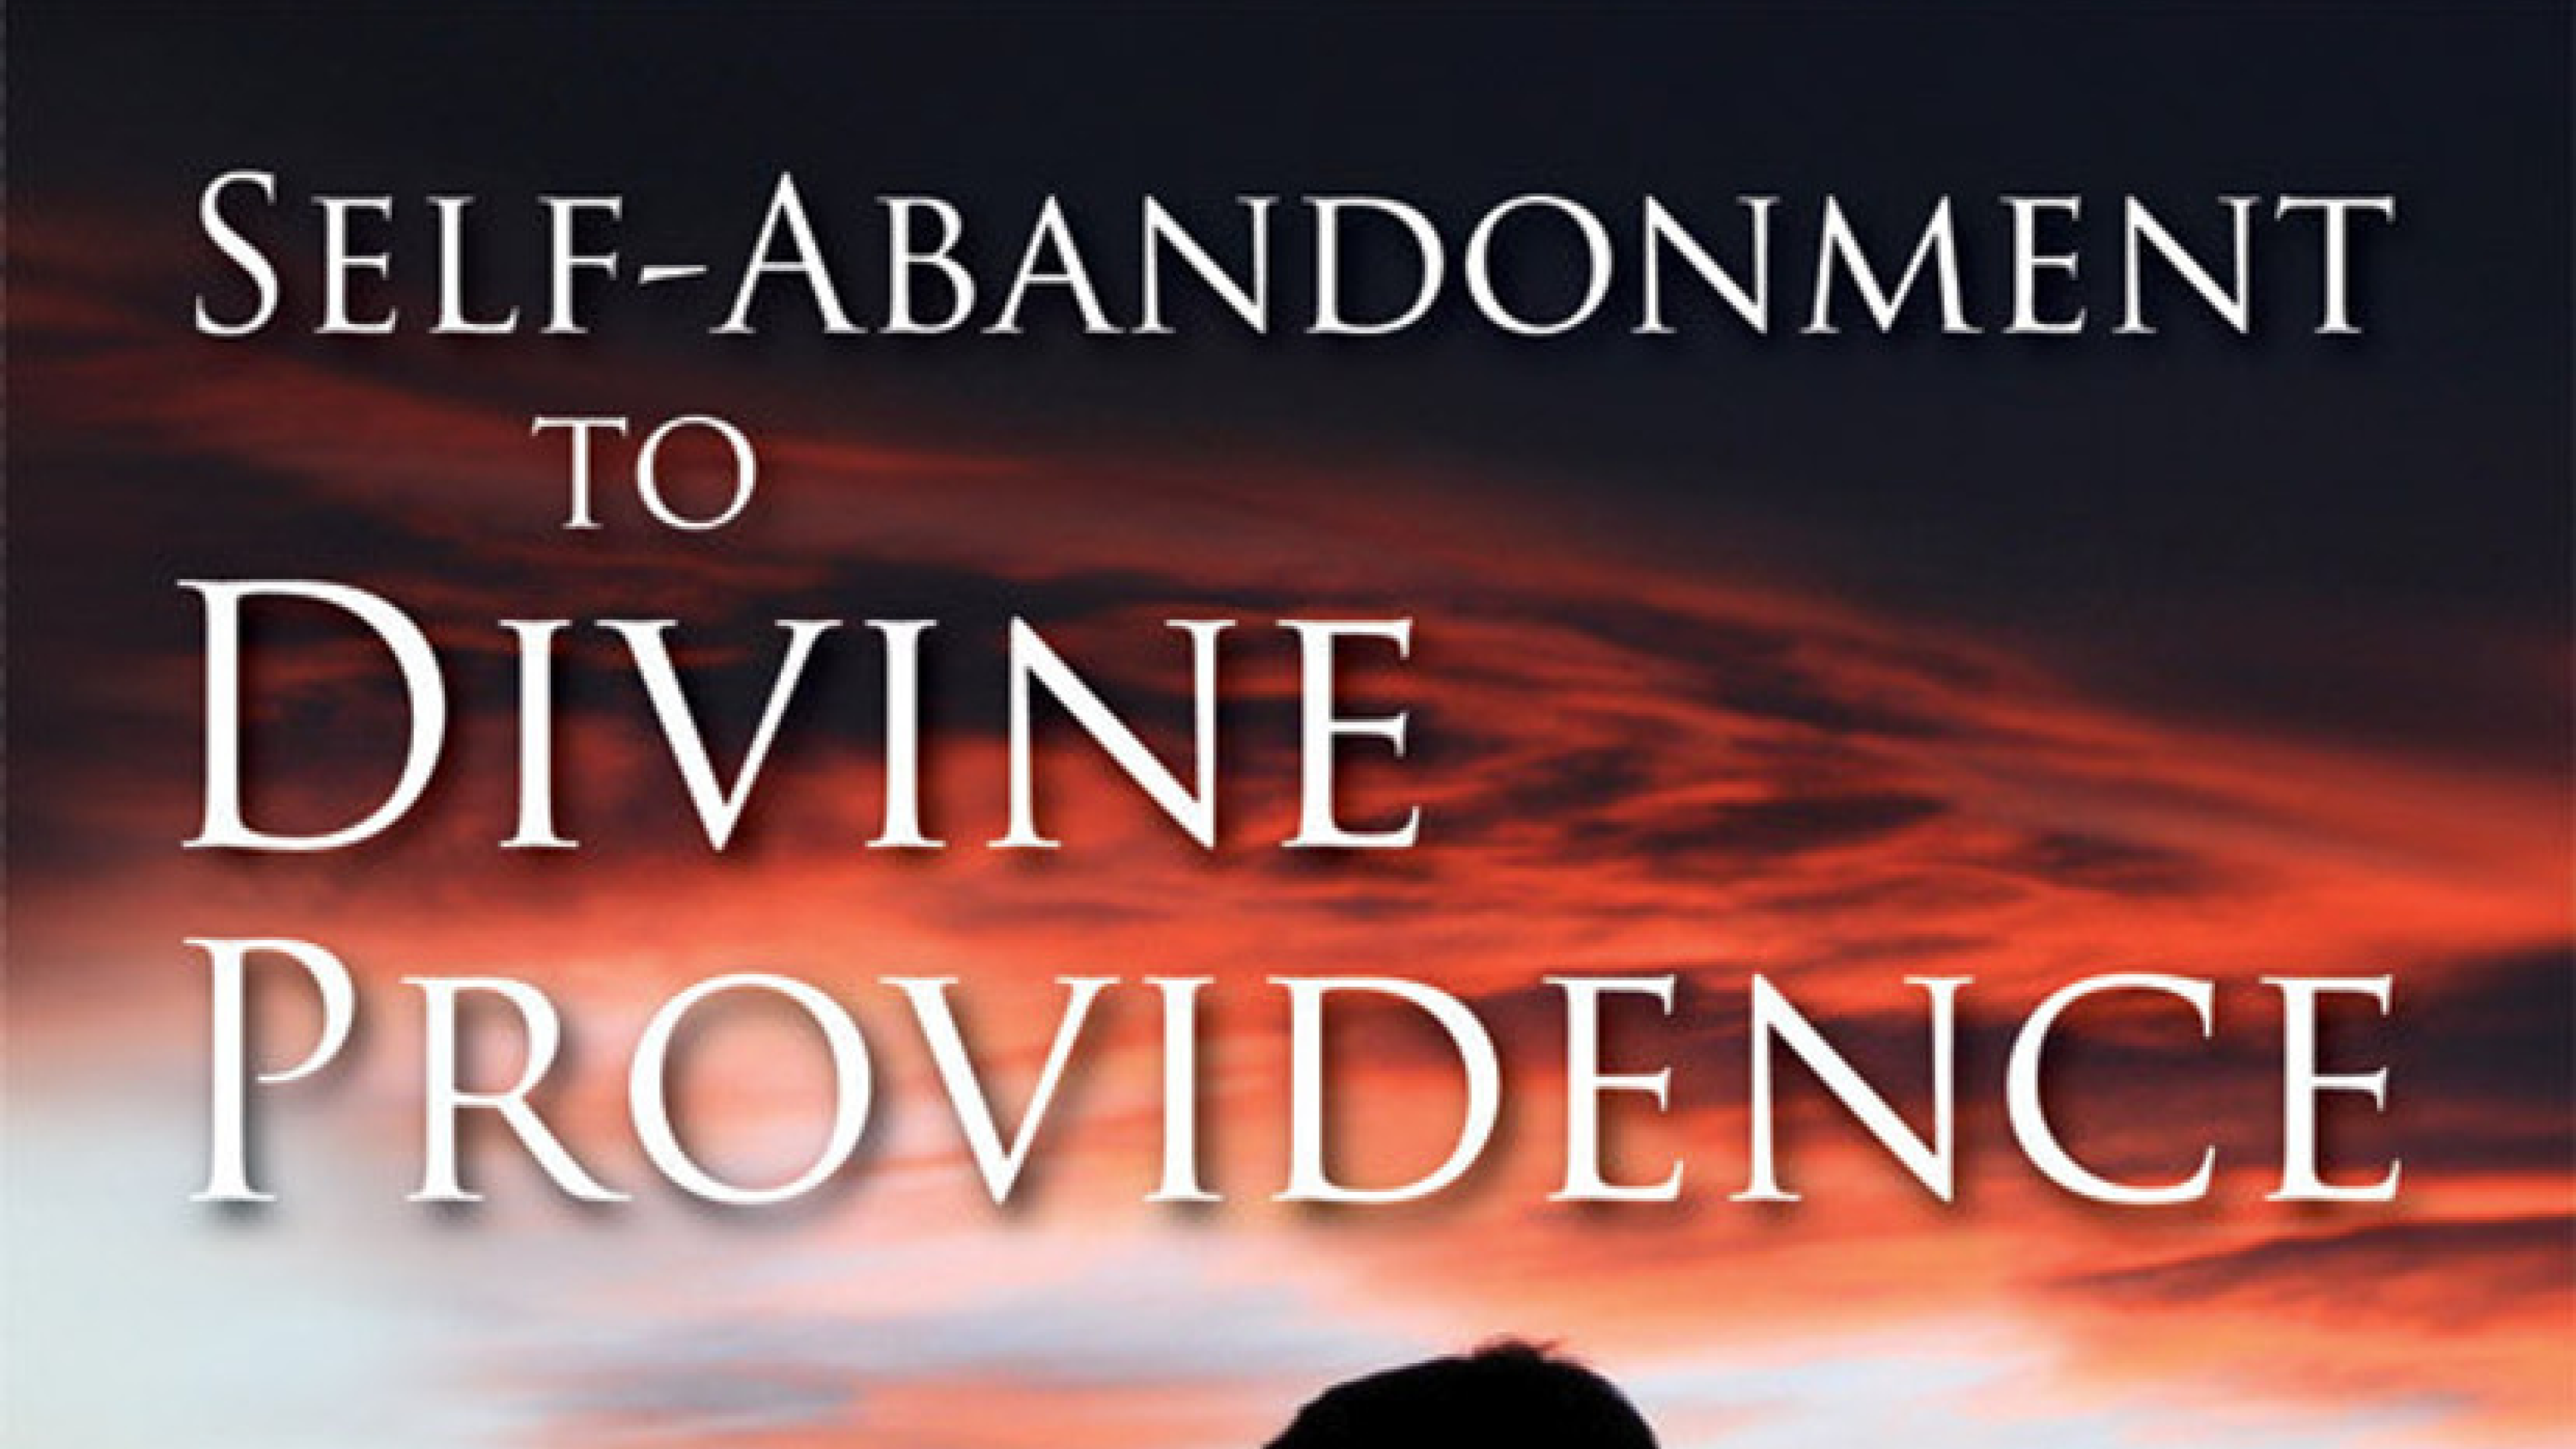 Self-Abandonment to Divine Providence by Fr. Jean-Pierre de Caussade